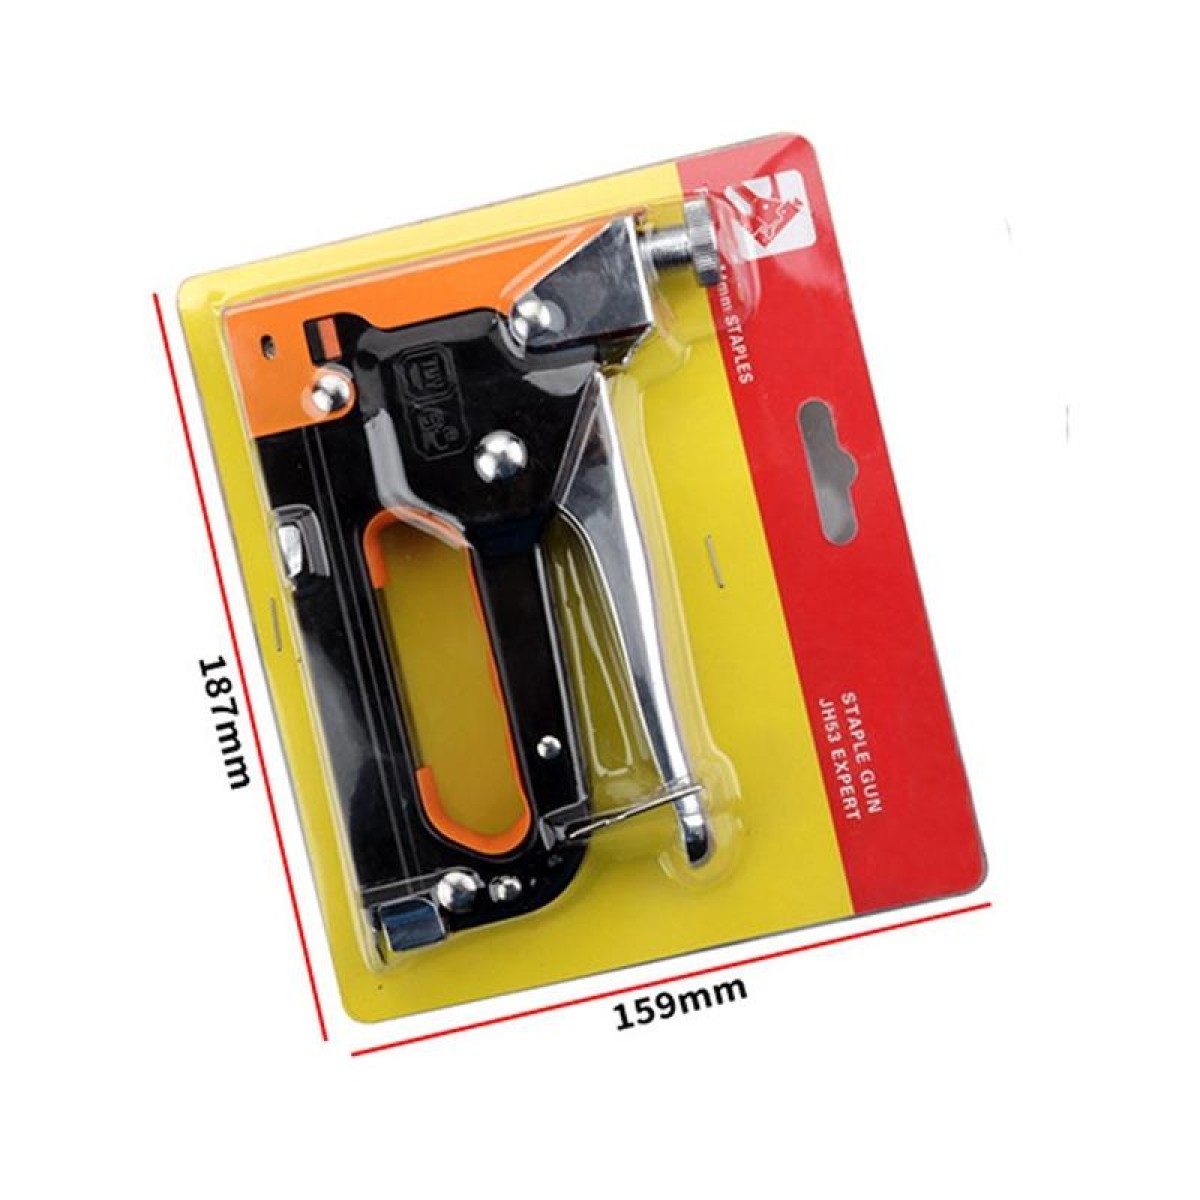 3 In 1 Manual Heavy-Duty Nailing Tool, Model: 11070A  Without Nails